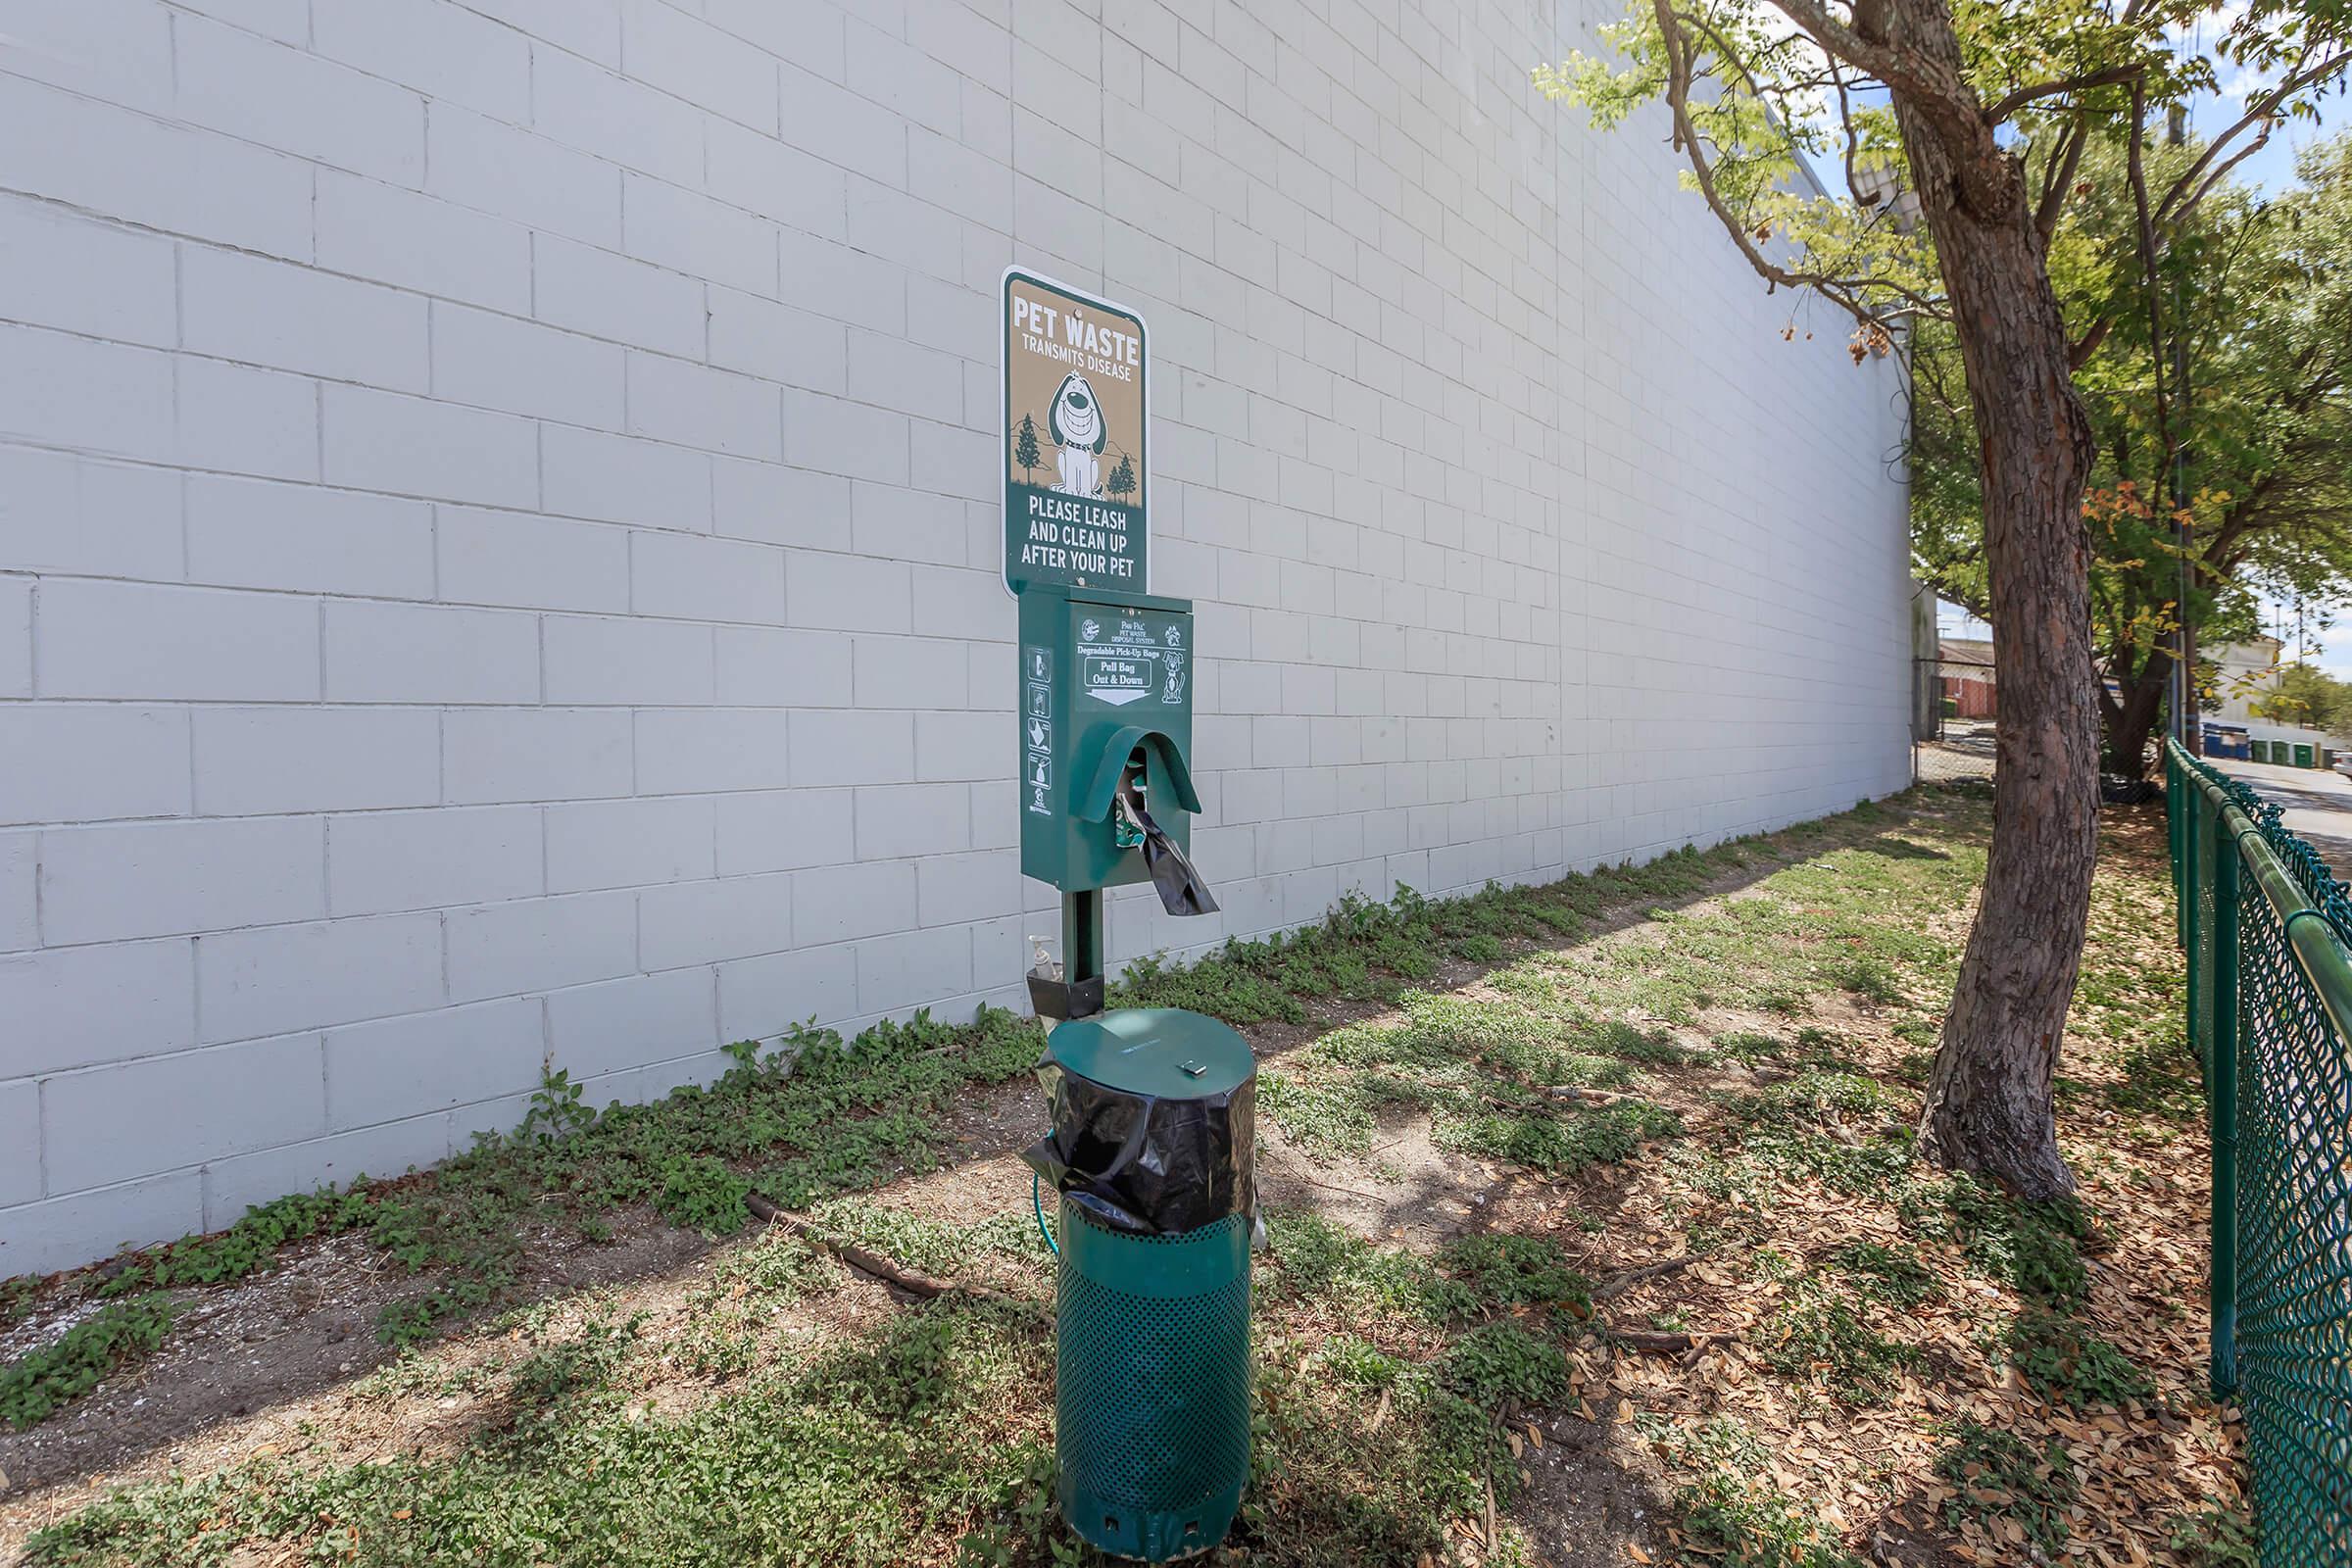 PET WASTE STATIONS FOR YOUR CONVENIENCE